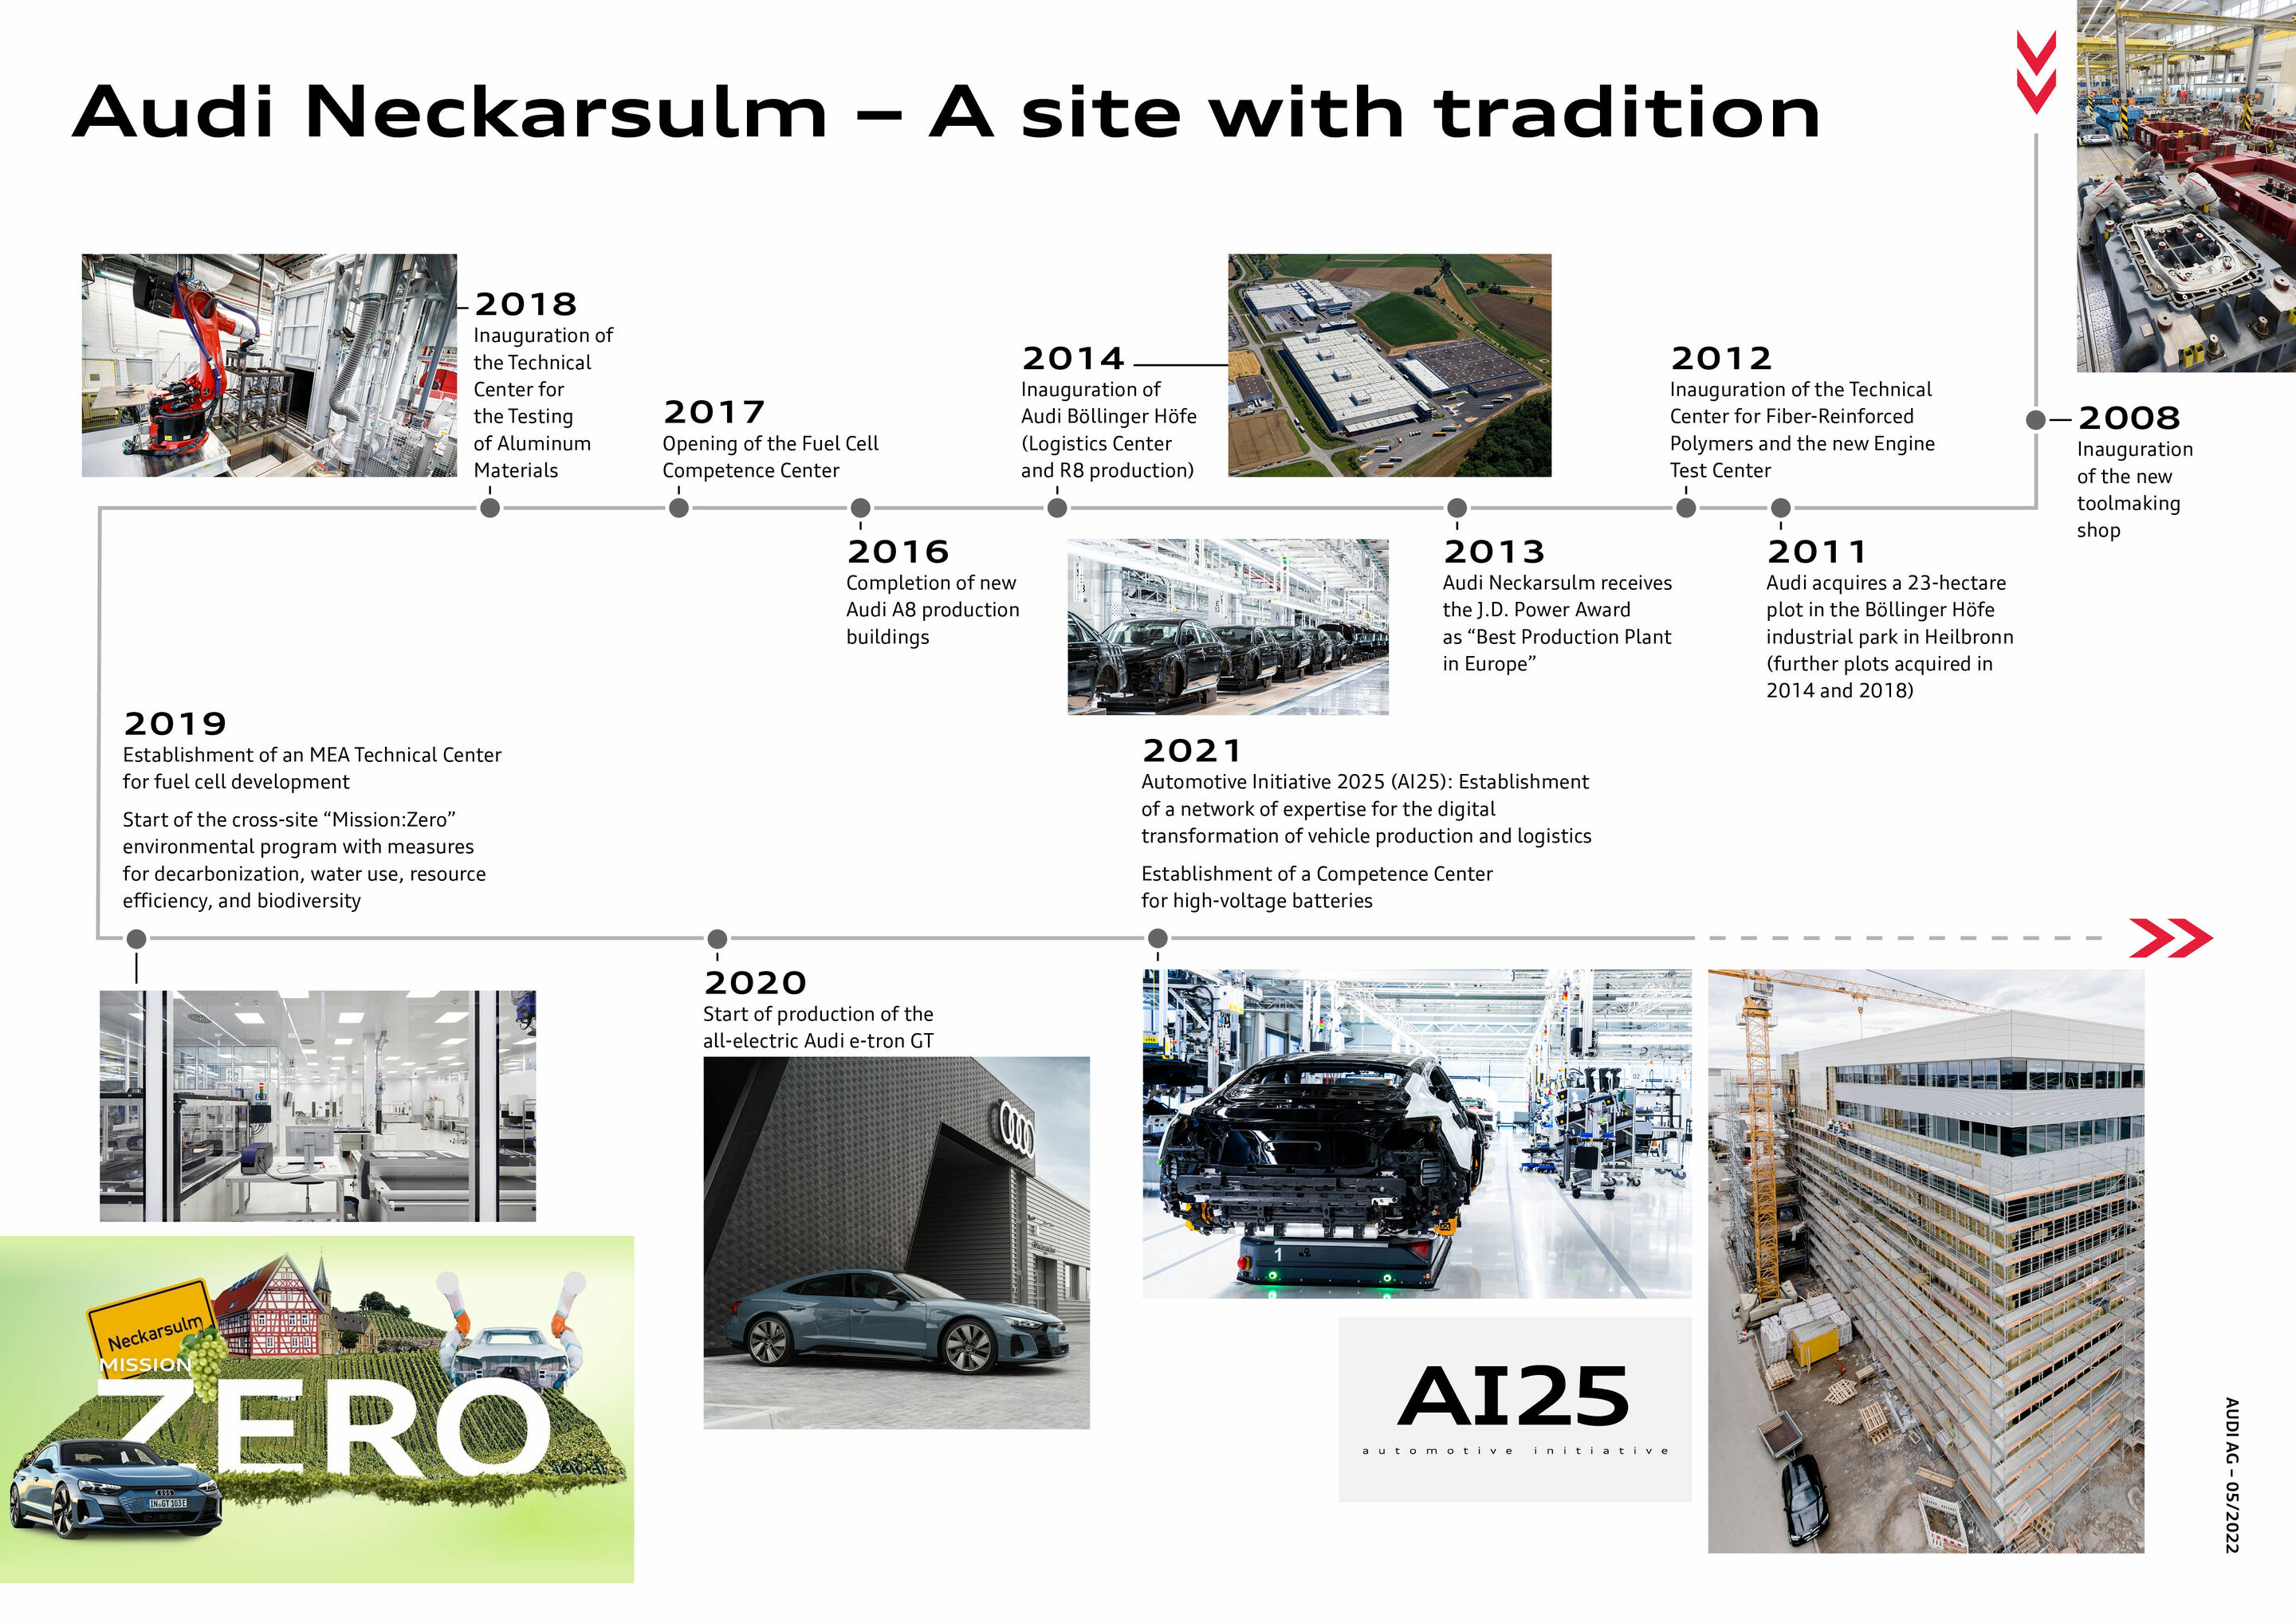 Audi Neckarsulm - A site with tradition